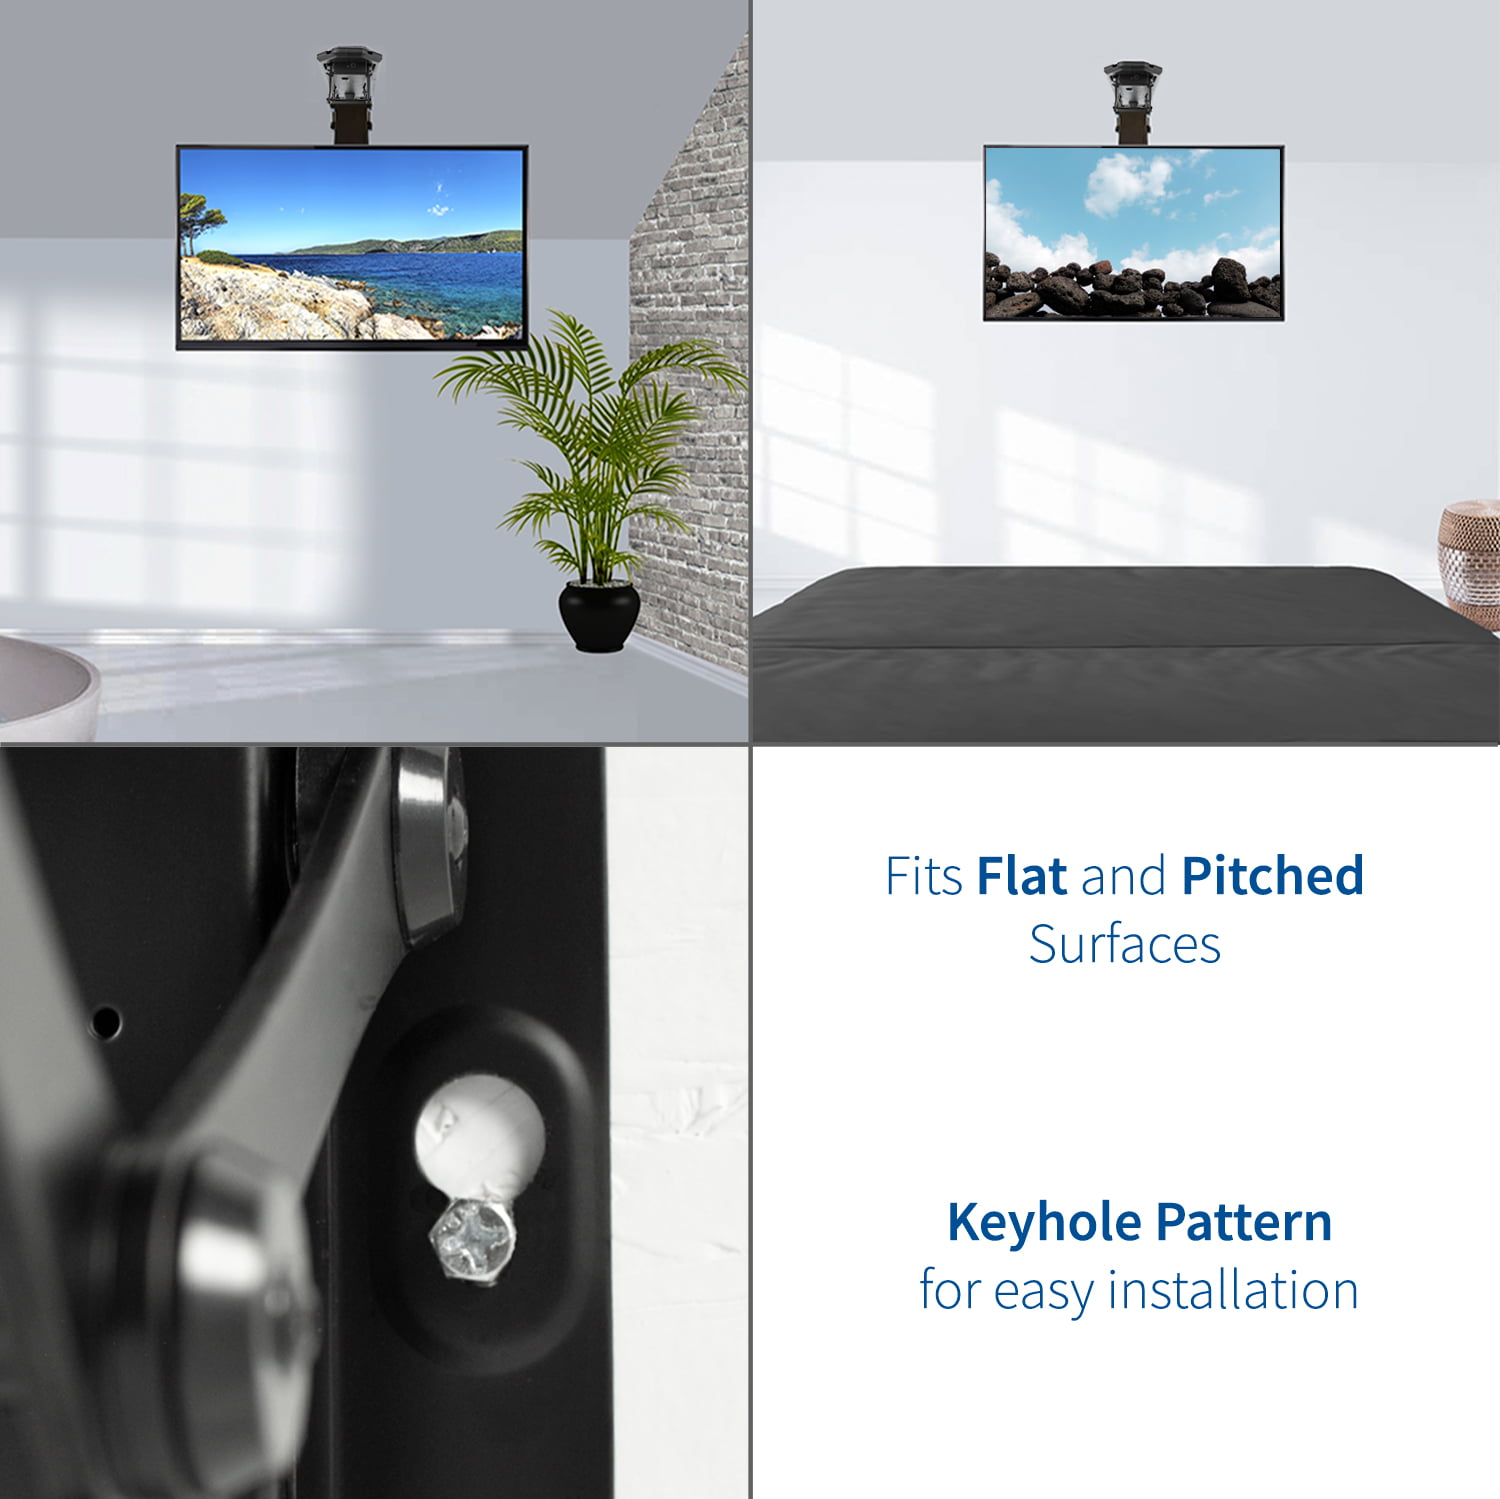 Electric Motorized Down Pitched Roof TV Mount for 32" to Screen - Walmart.com